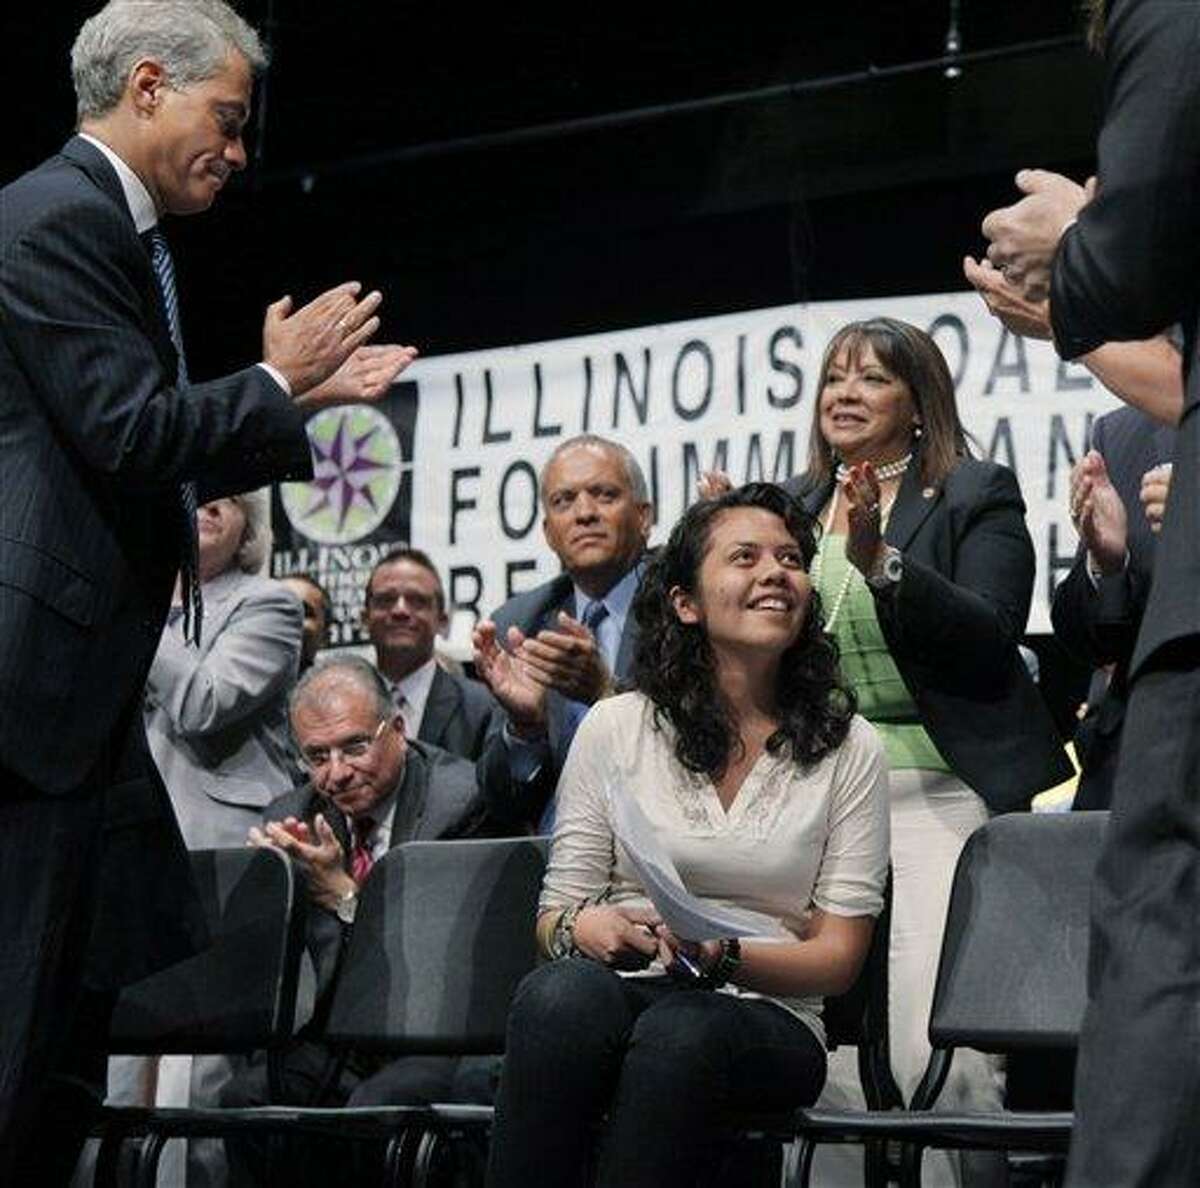 Chicago Mayor Rahm Emanuel, left, joins other officials in giving Arianna Salgado a standing ovation for the speech she gave before Illinois Gov. Pat Quinn signed the Illinois Dream Act into law, Monday, Aug. 1, 2011, at a Latino neighborhood high school in Chicago. The new Illinois law gives illegal immigrants access to private scholarships for college. Students qualify if they attended an Illinois high school for at least three years, received a diploma and have at least one parent who is an immigrant. Immigrant children here both illegally and legally can apply. Salgado, who worked with activists to help pass the bill, is a recent high school graduate who came to the U.S. from Mexico when she was 6-years-old, and she is not a U.S. citizen. She will enter Dominican University in the fall. (AP Photo/M. Spencer Green)